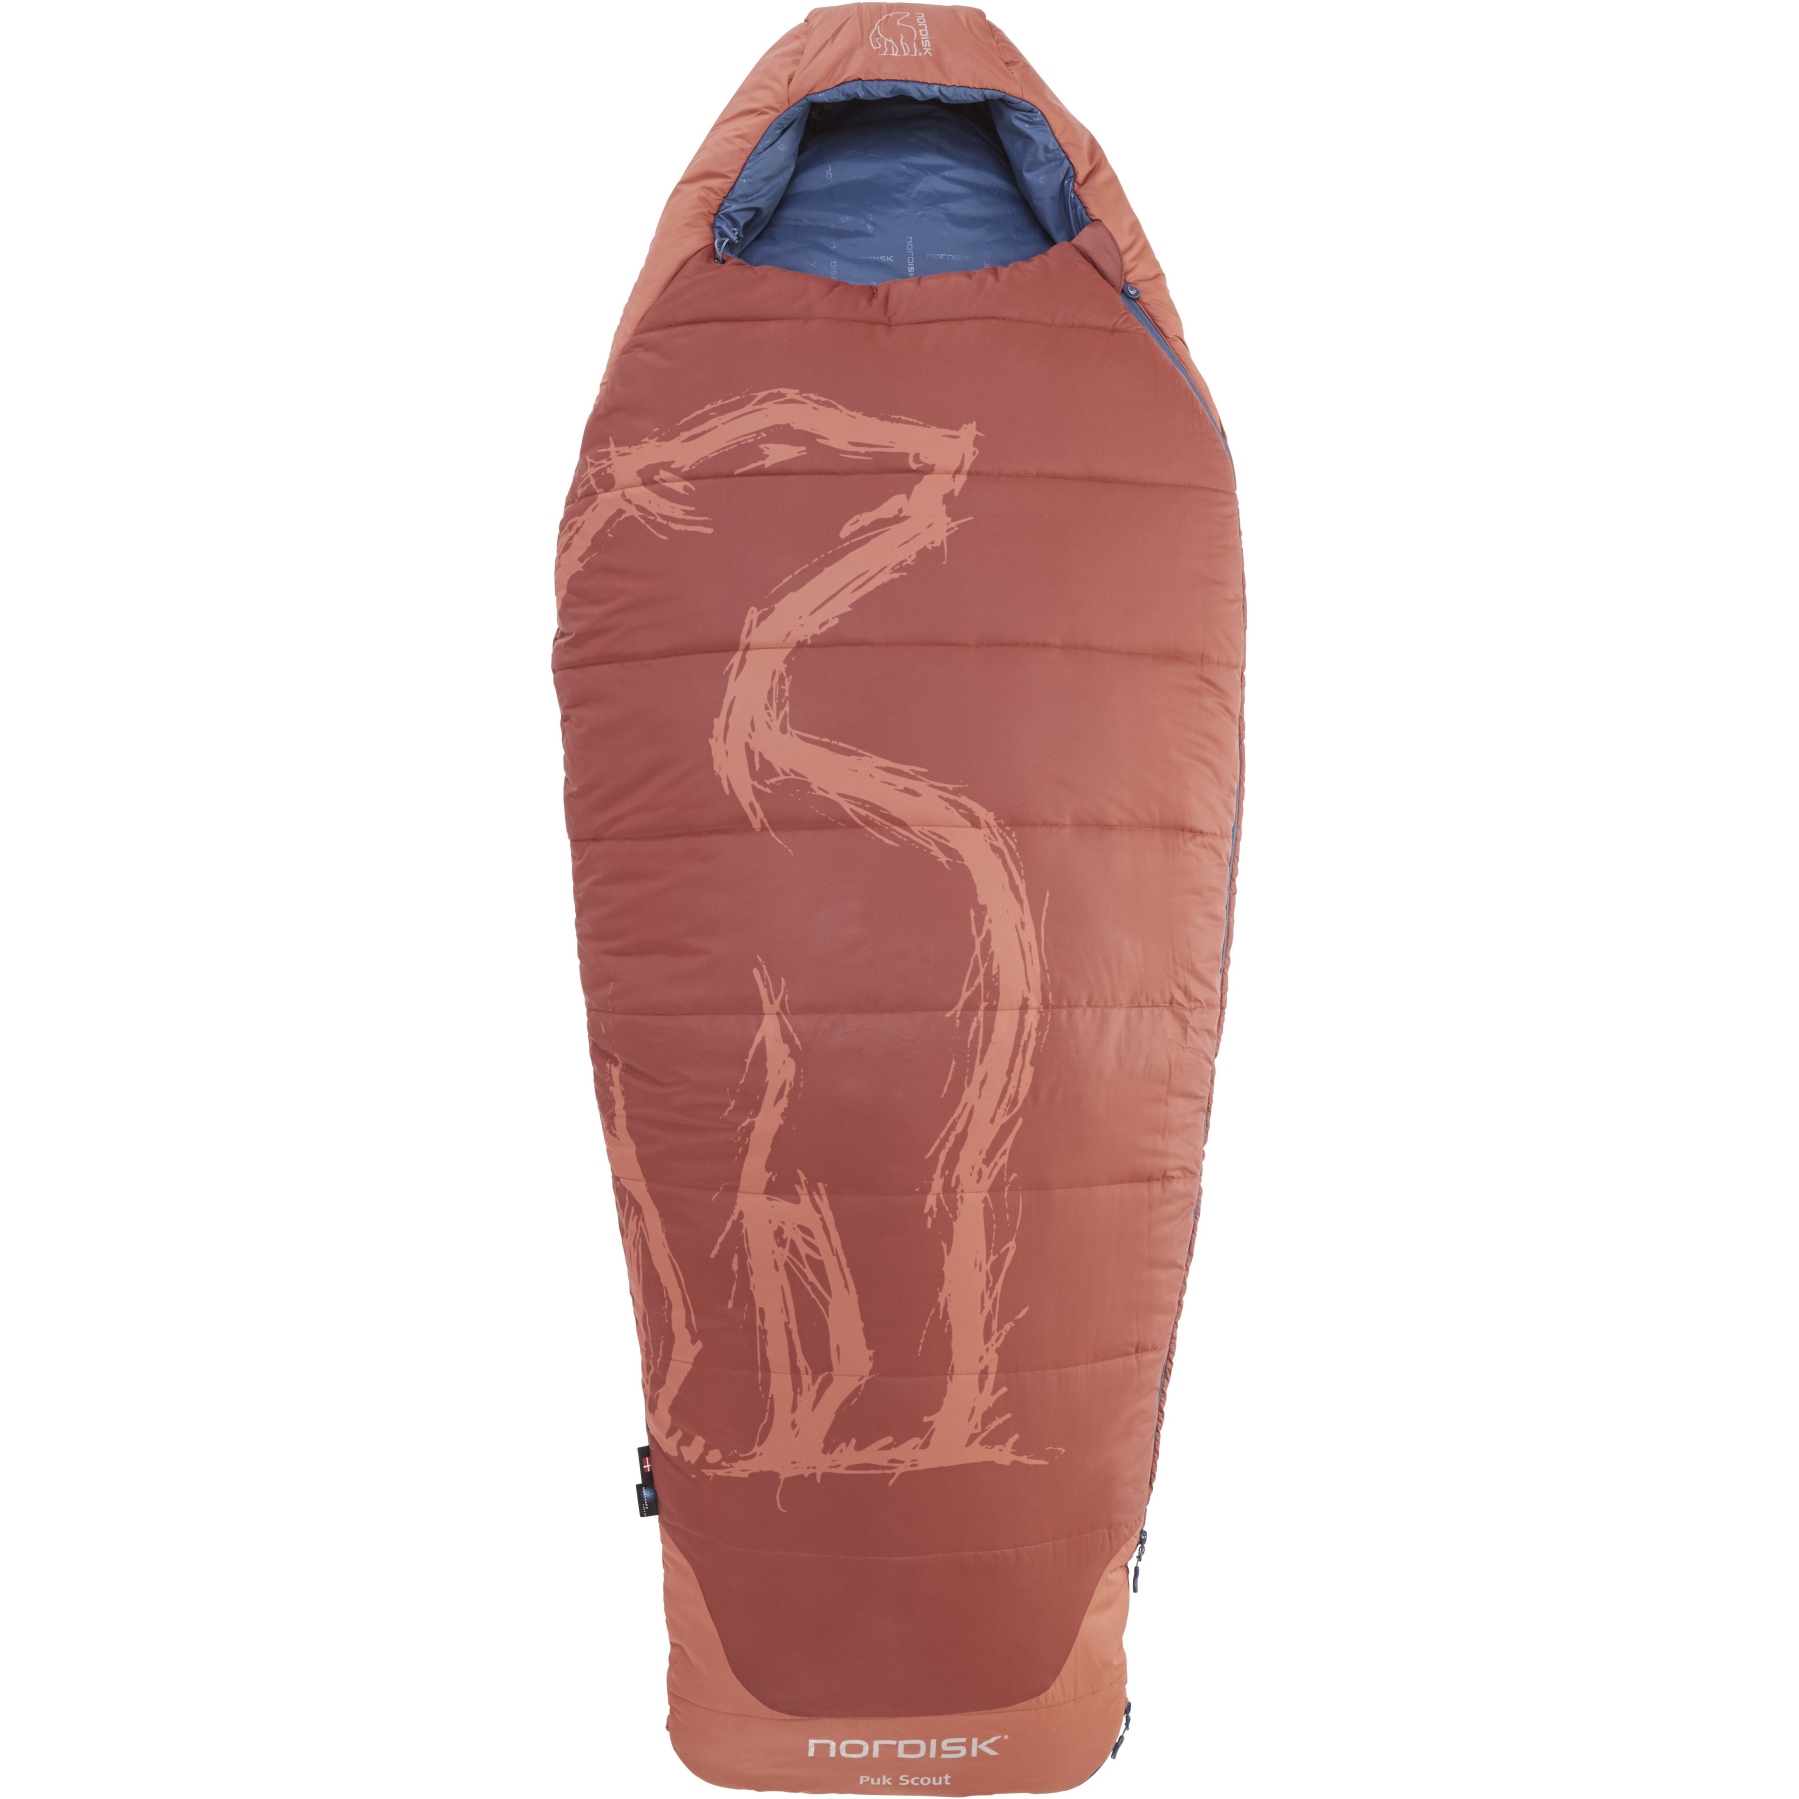 Picture of Nordisk Puk Scout 130-170cm Sleeping Bag - Sundried Tomato